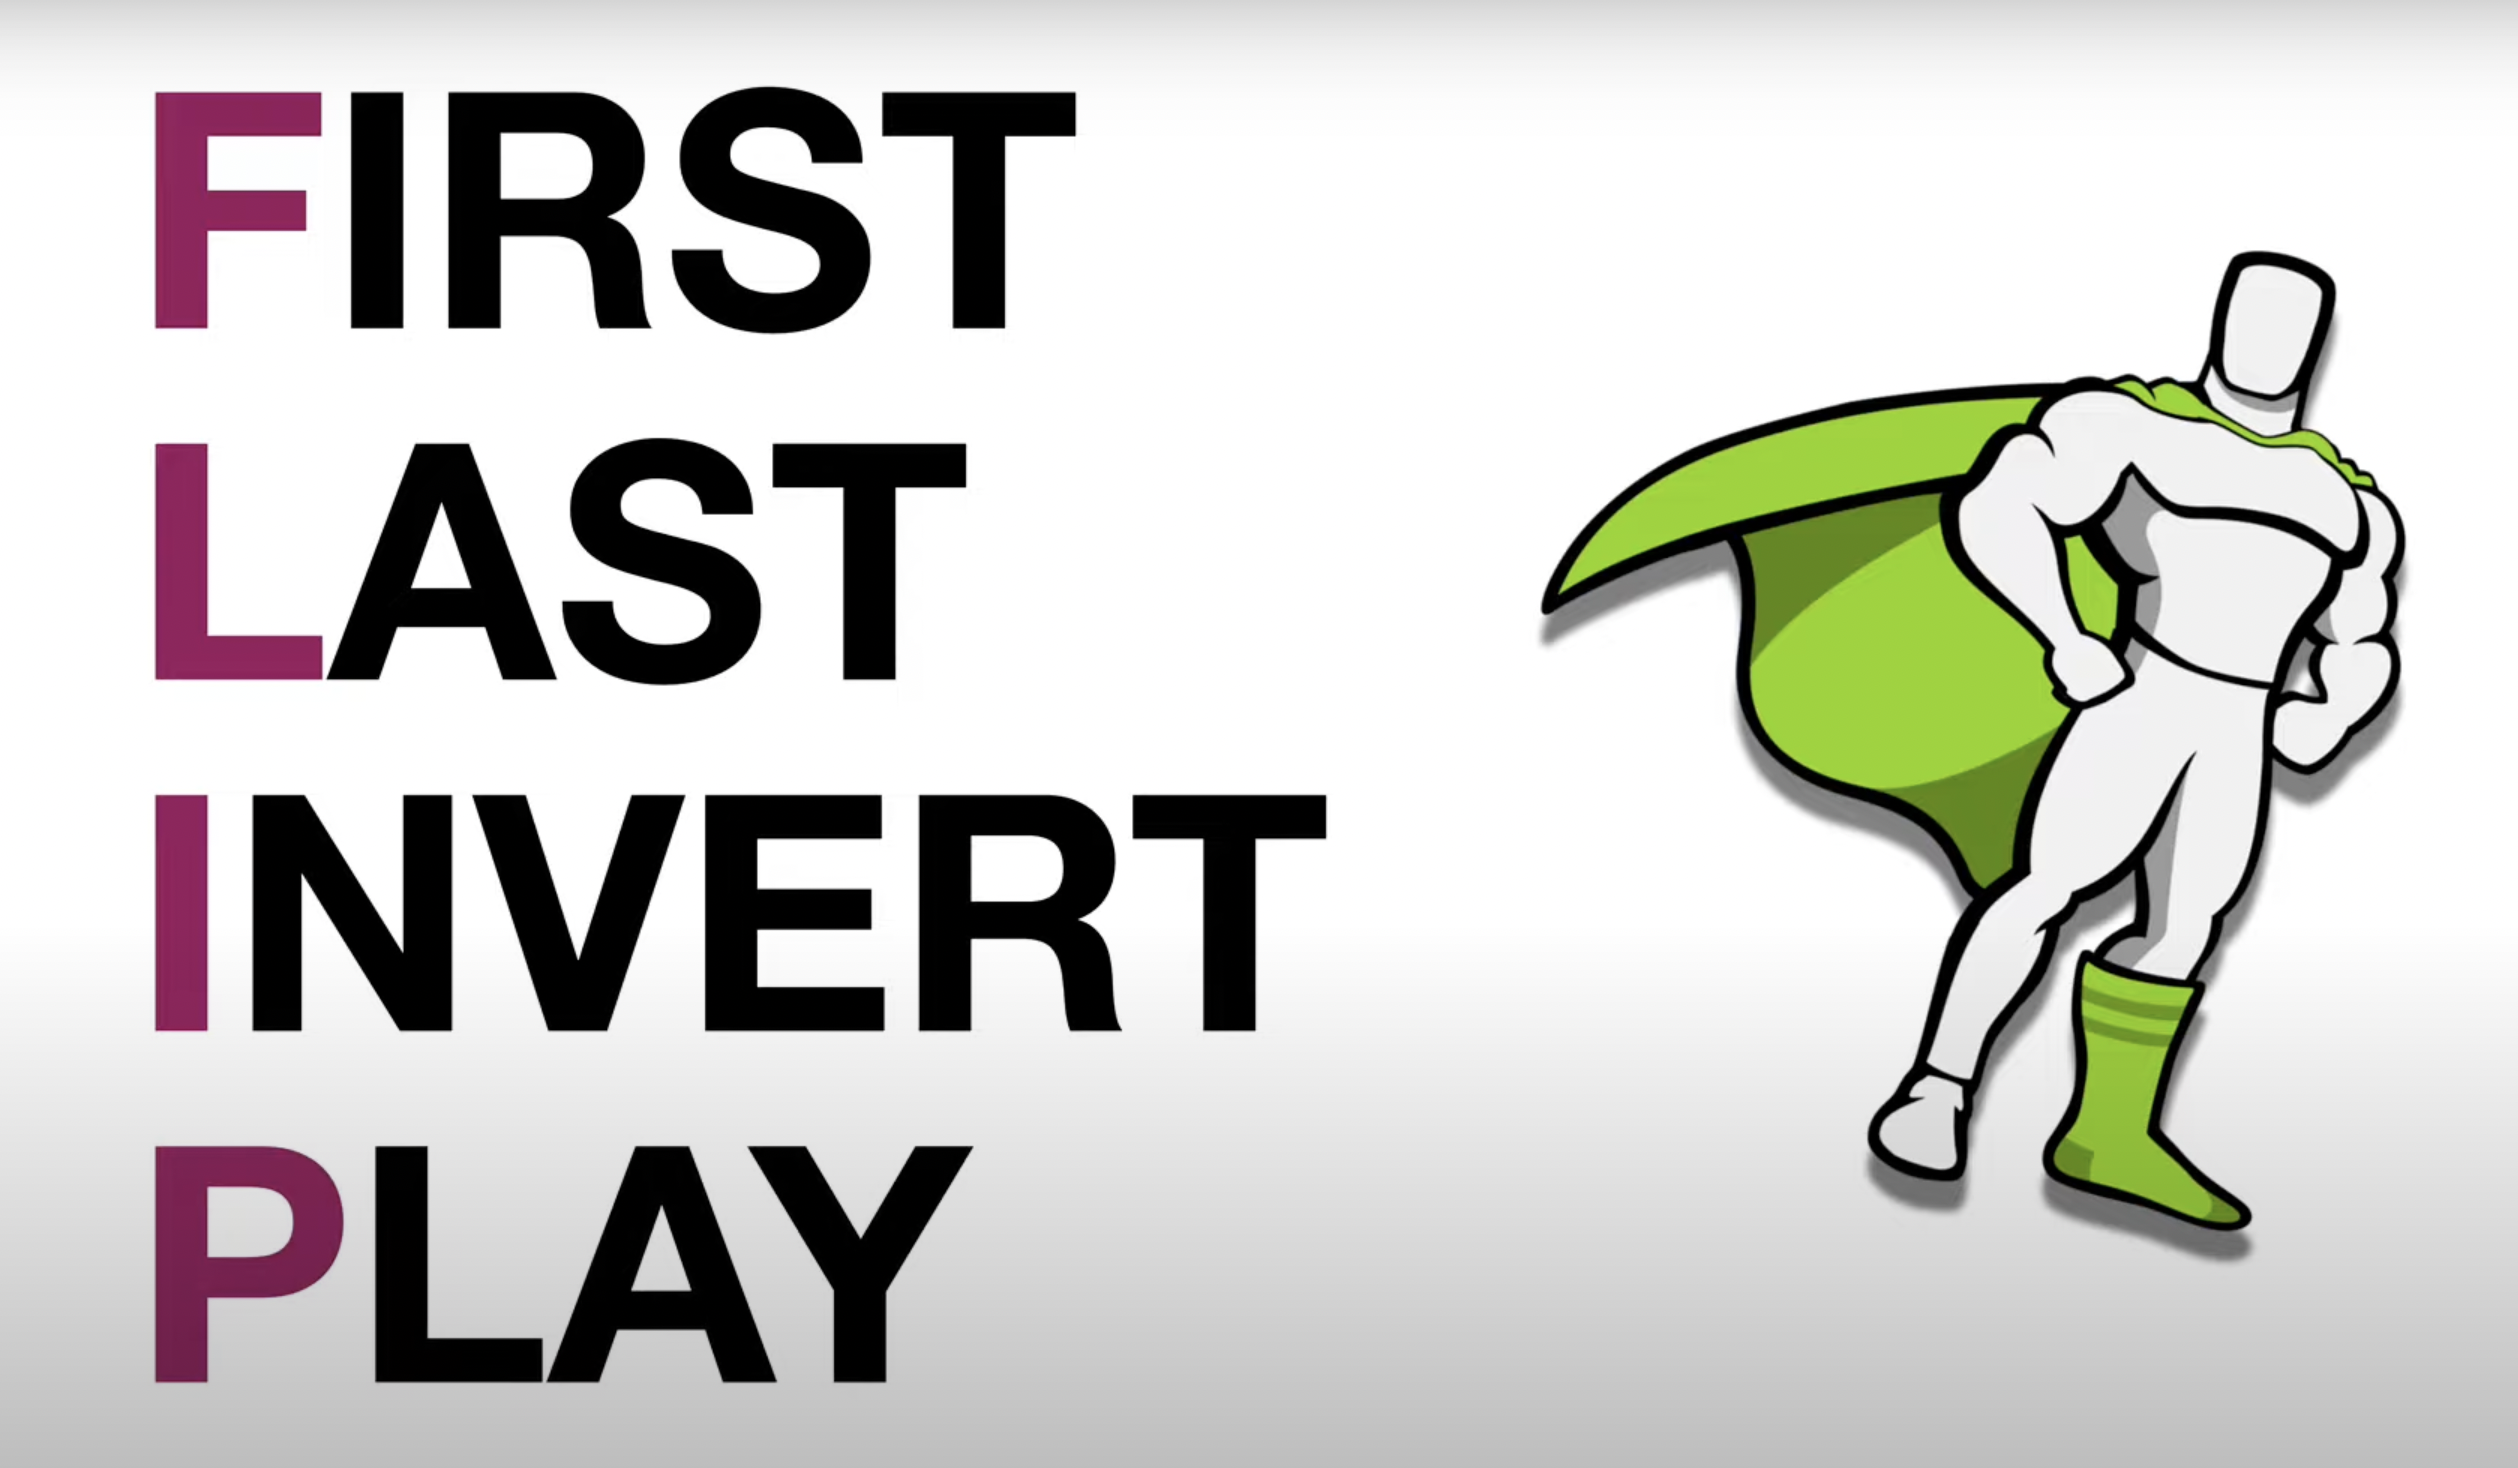 Flip is an acronym for first, last, invert, play